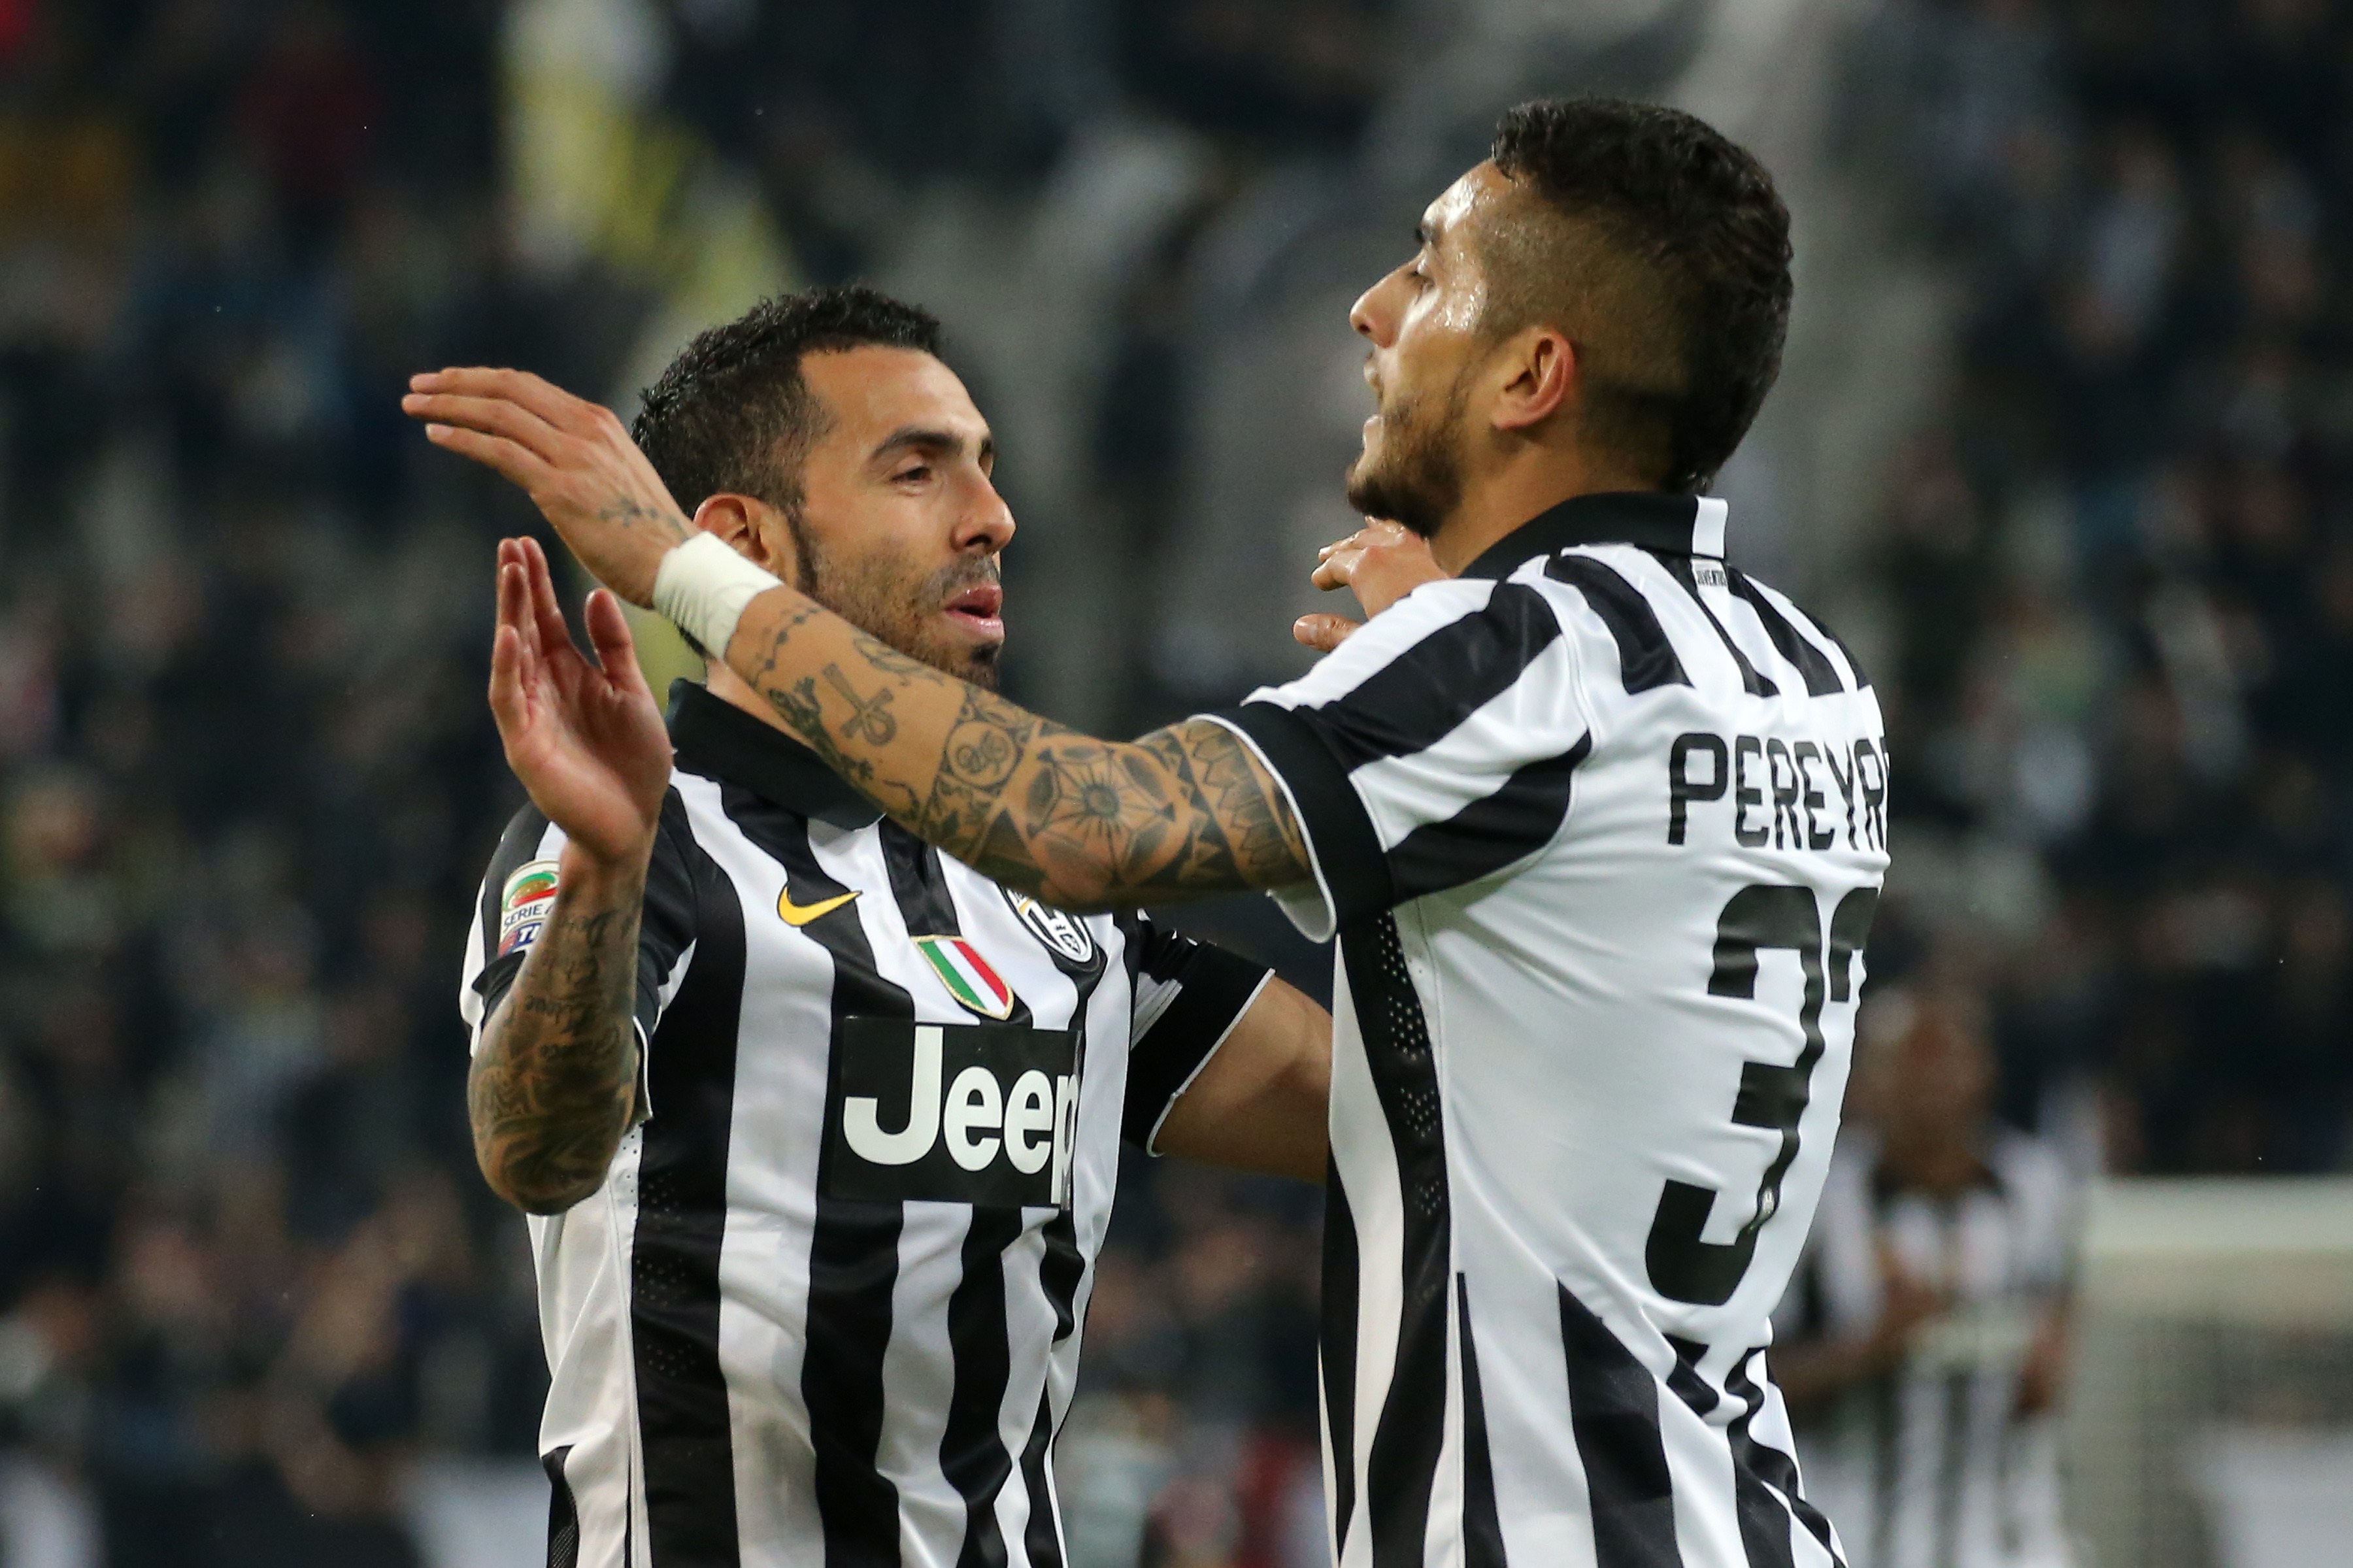  Video – On this day, Tevez’s scorcher was the difference between Juve and Genoa